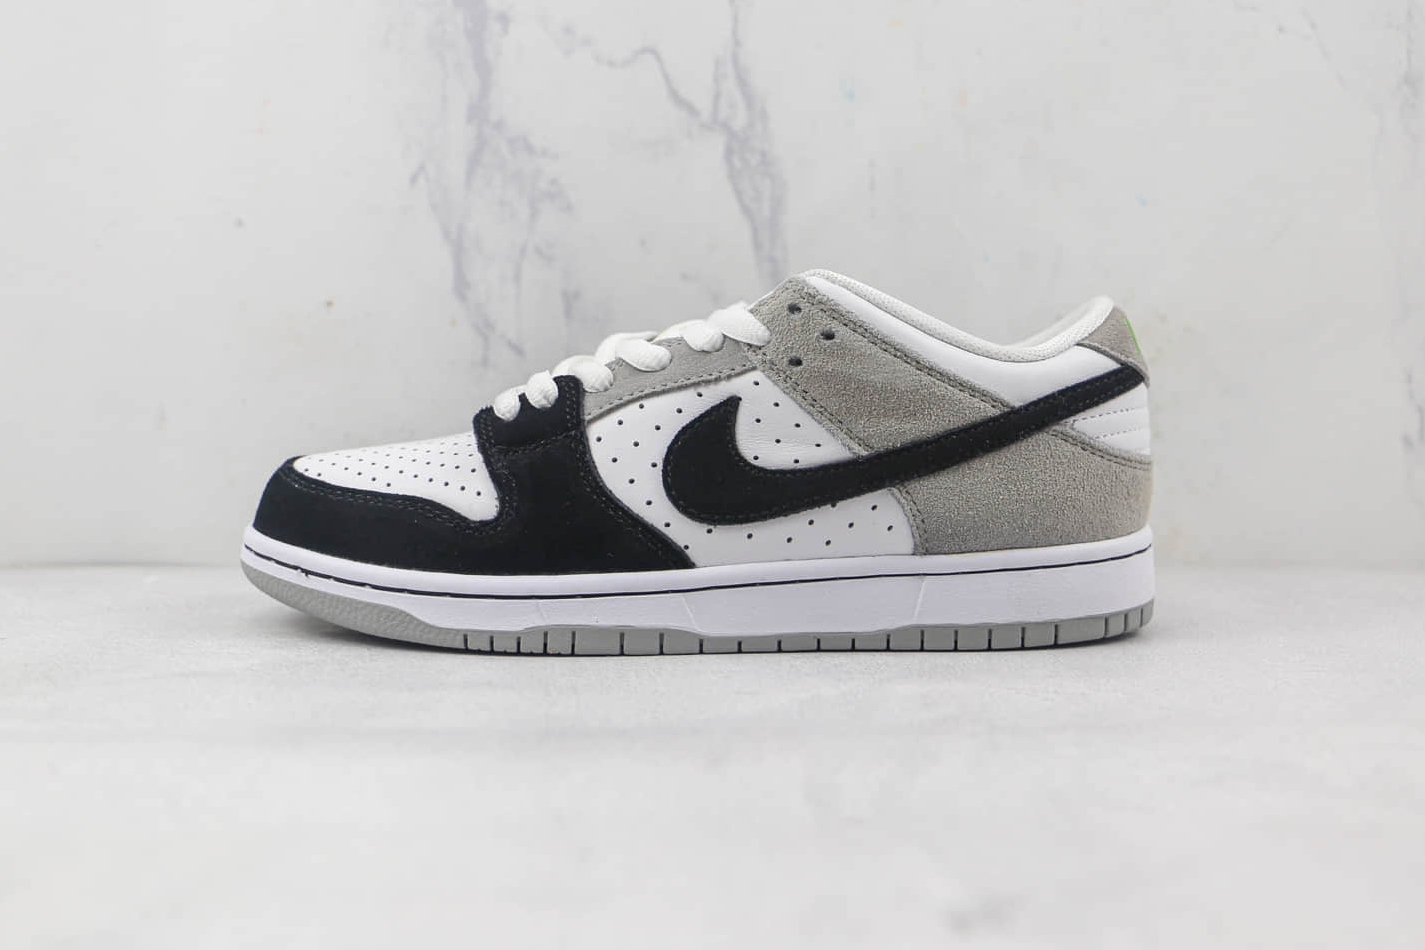 Nike SB Skateboard Dunk Low Pro 'Chlorophyll' BQ6817-011 - Stylish and Durable Athletic Sneakers for Skateboarding